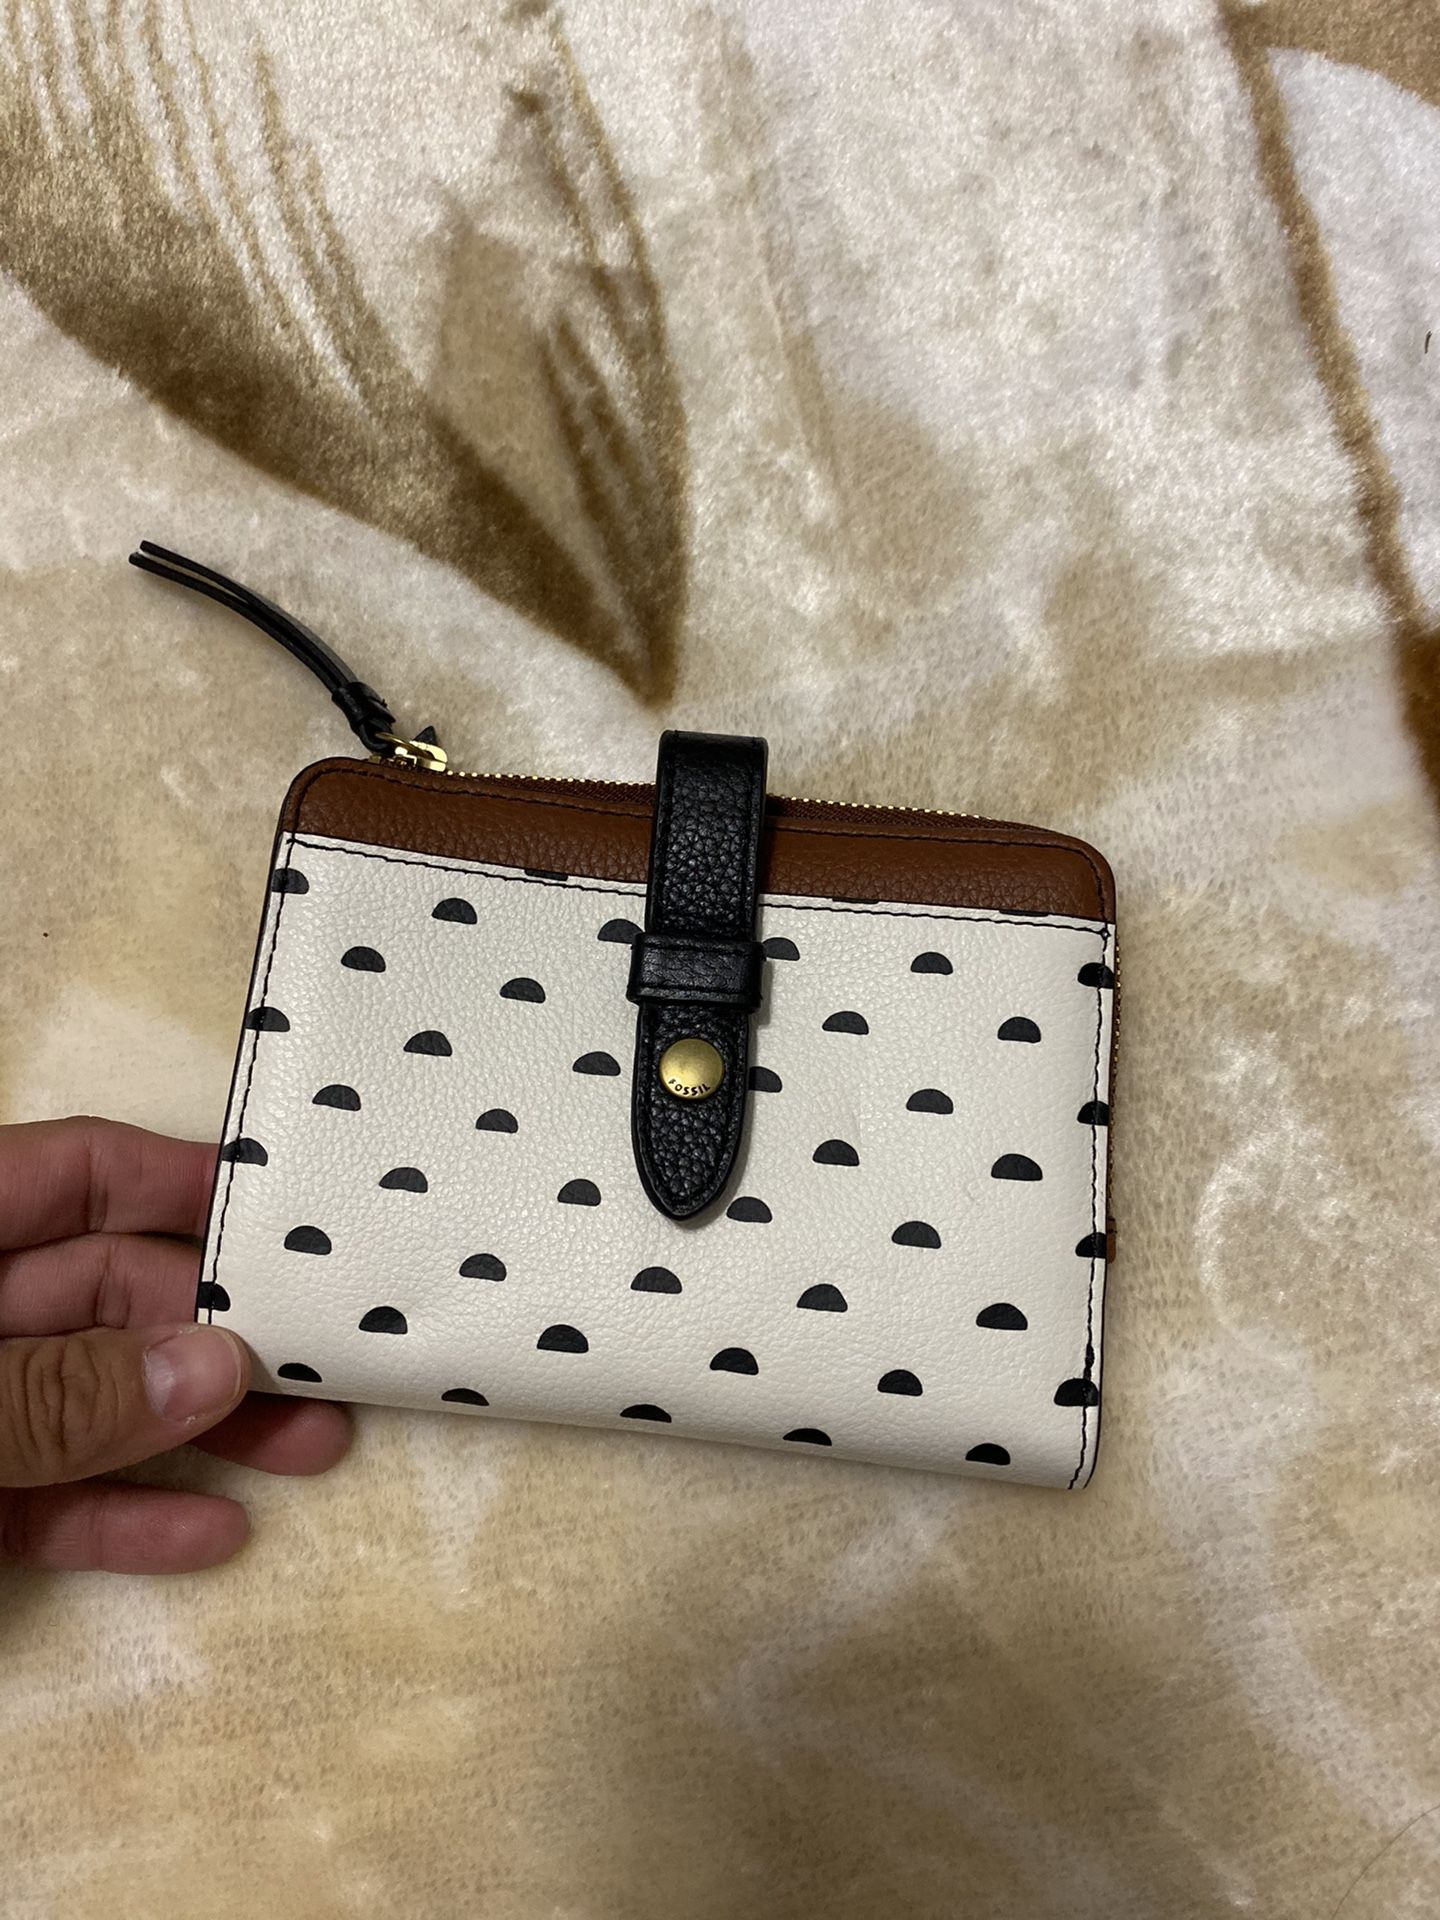 NWT Fossil wallet